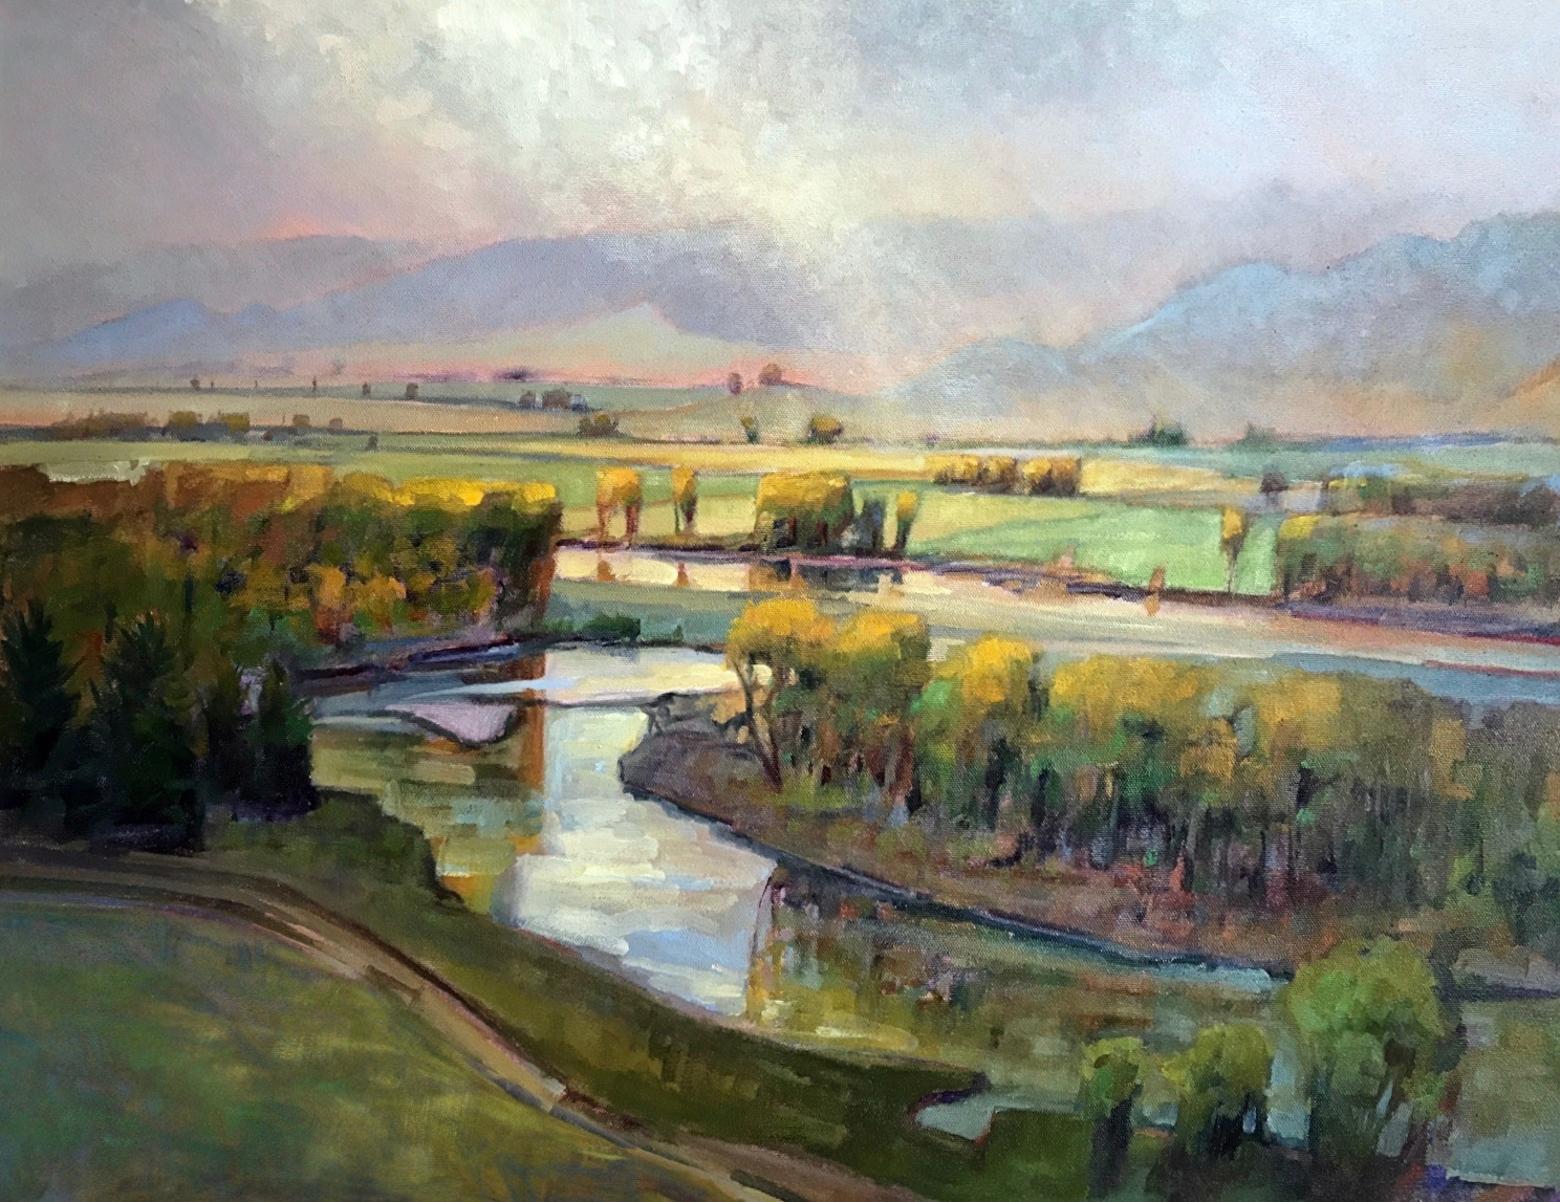 A portrayal of the Yellowstone River wending through Paradise Valley and Park County, Montana by the great contemporary painter Robert Spanning. Imagine this scene if the landscape was coated in sprawl. Some say you can't stop change or "progress," but does it also apply to developers who have no respect for a priceless view like this? To see more of Spanning's work, go to robertspannring.com